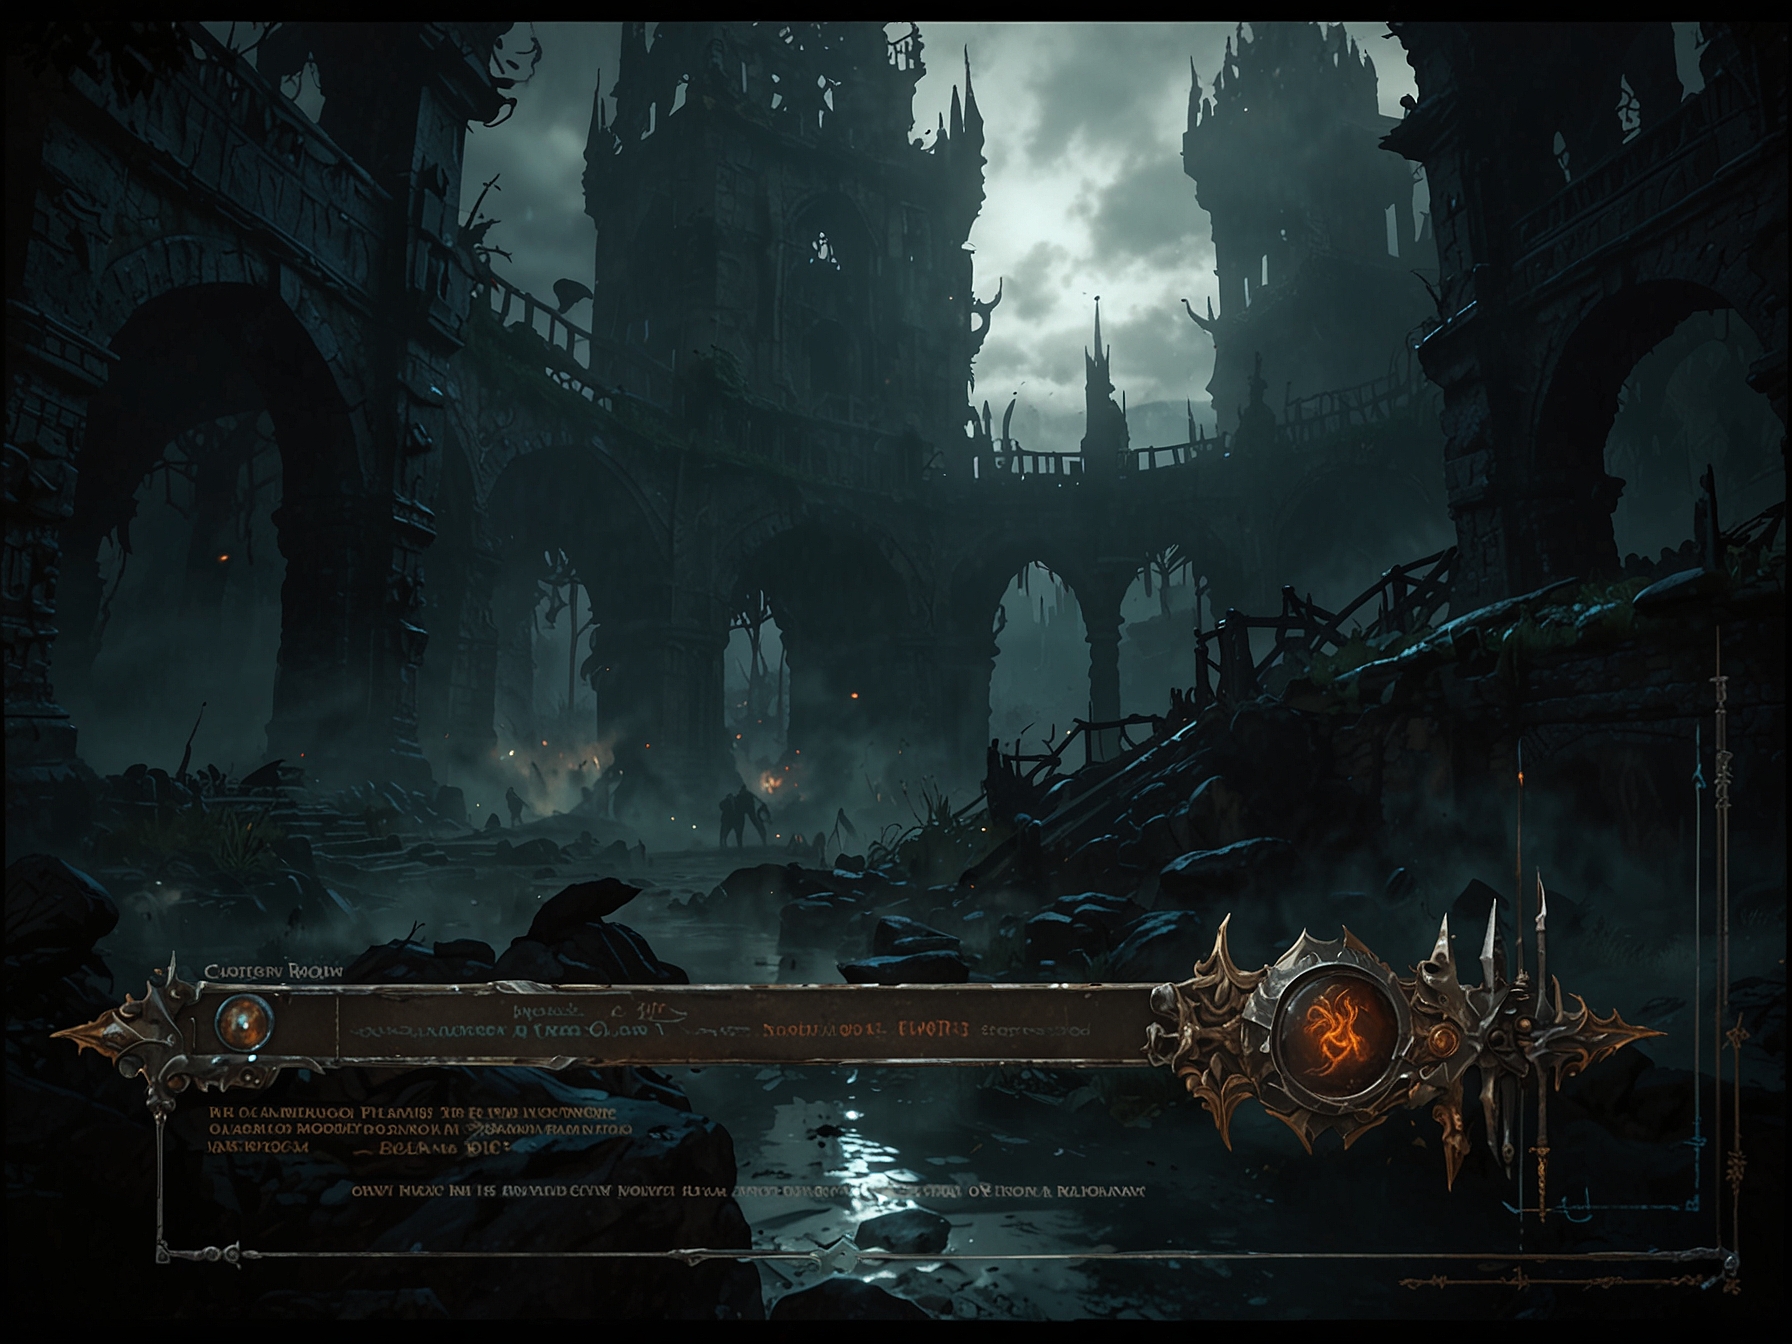 A gameplay screenshot showing frame rate drops and graphical glitches in Elden Ring: Shadow of the Erdtree on the PC. The image highlights the technical issues impacting player experience and calls for urgent fixes.